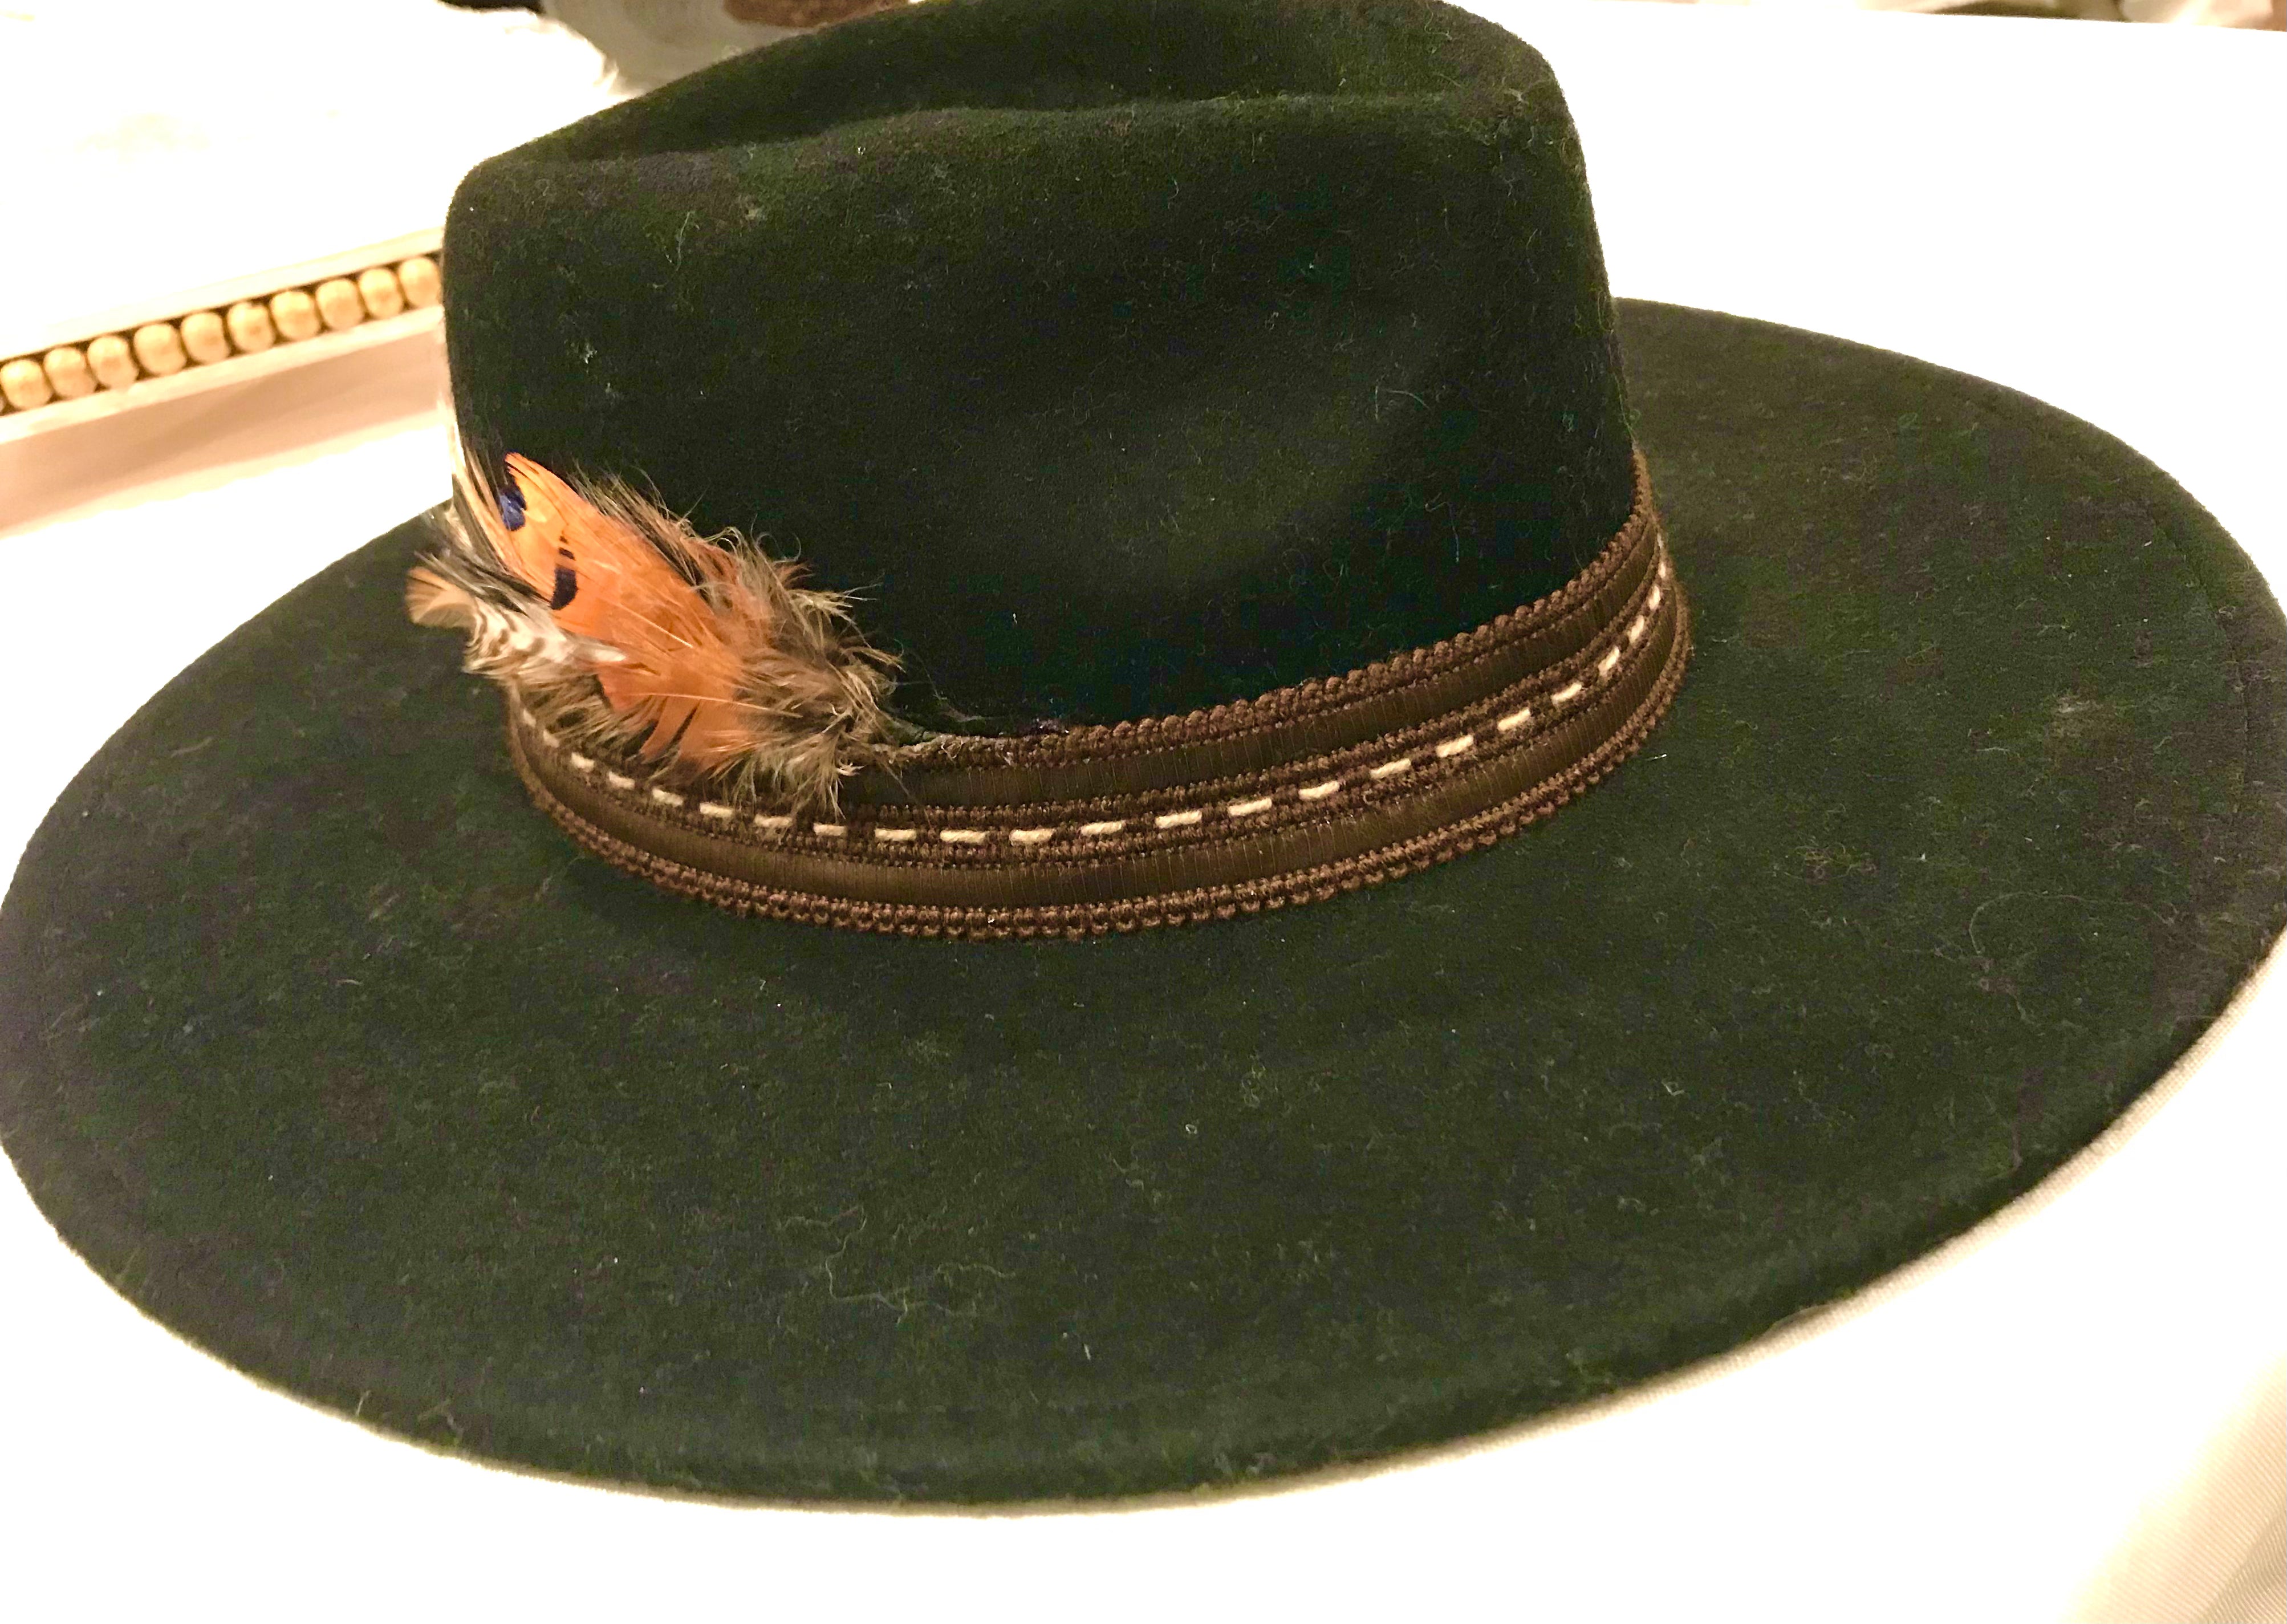 Black Felt Panama Hat with brown/beige detail and feather